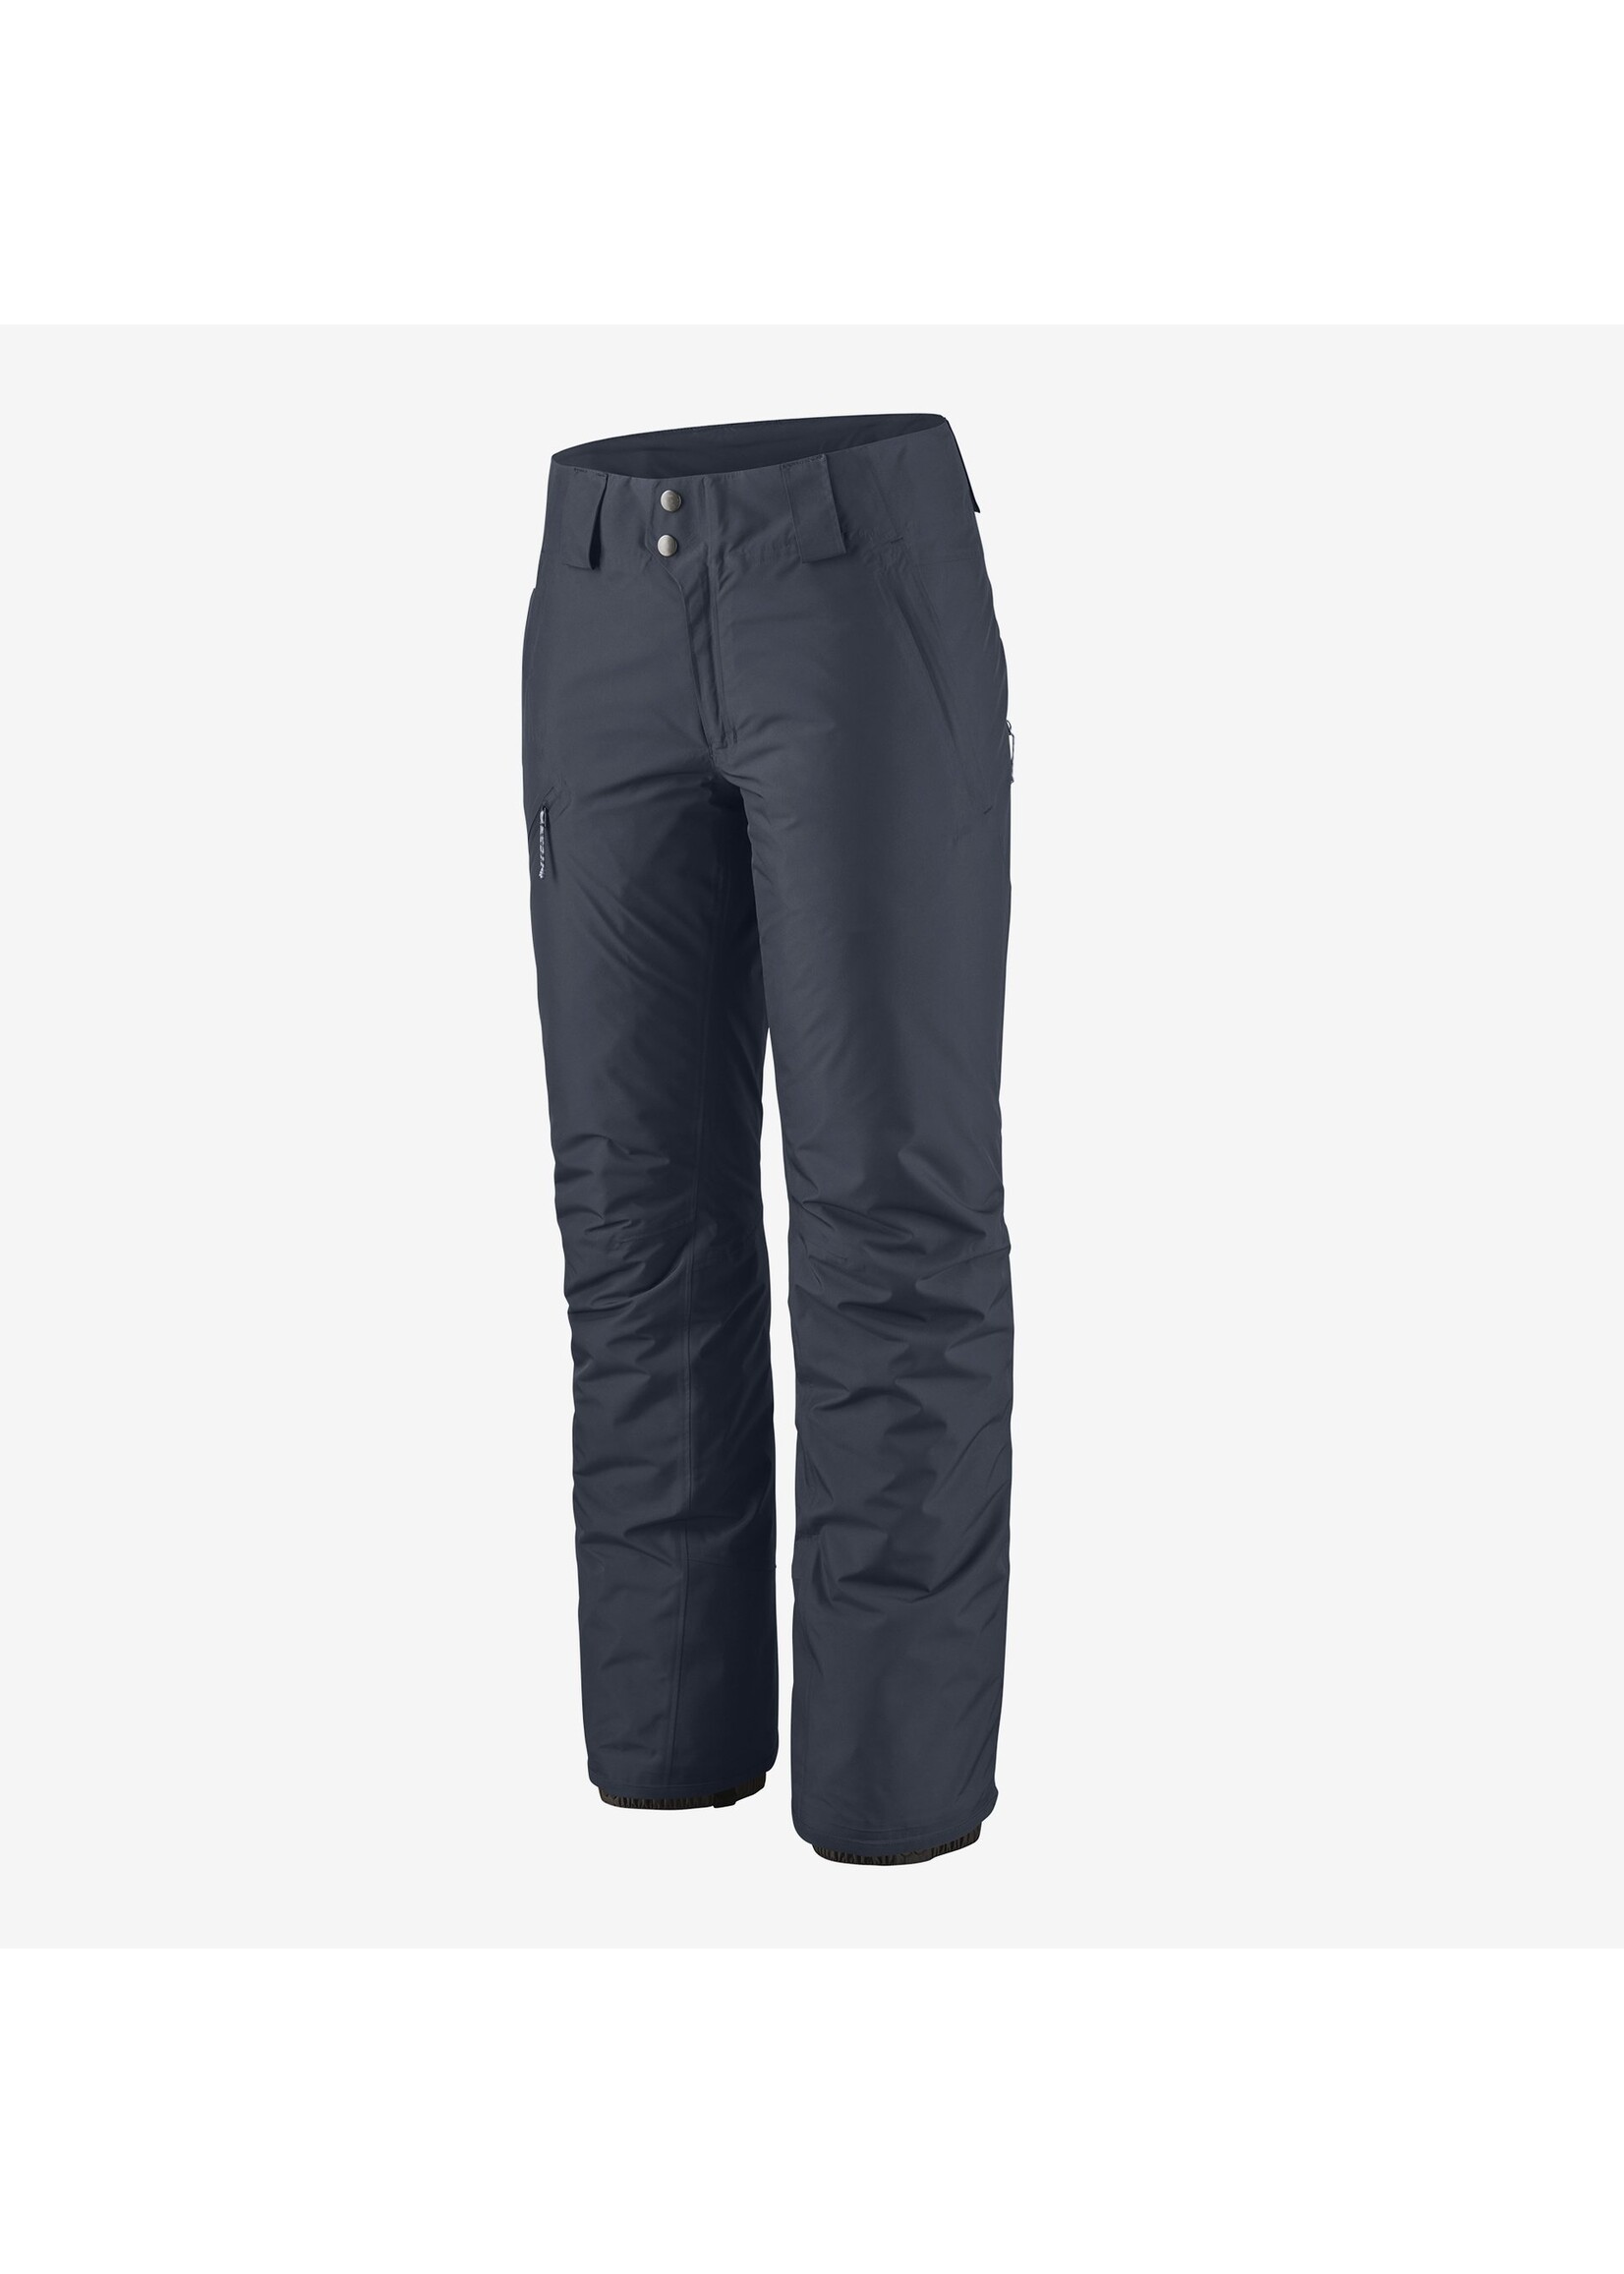 Patagonia W's Insulated Snowbelle Pants - Reg Black